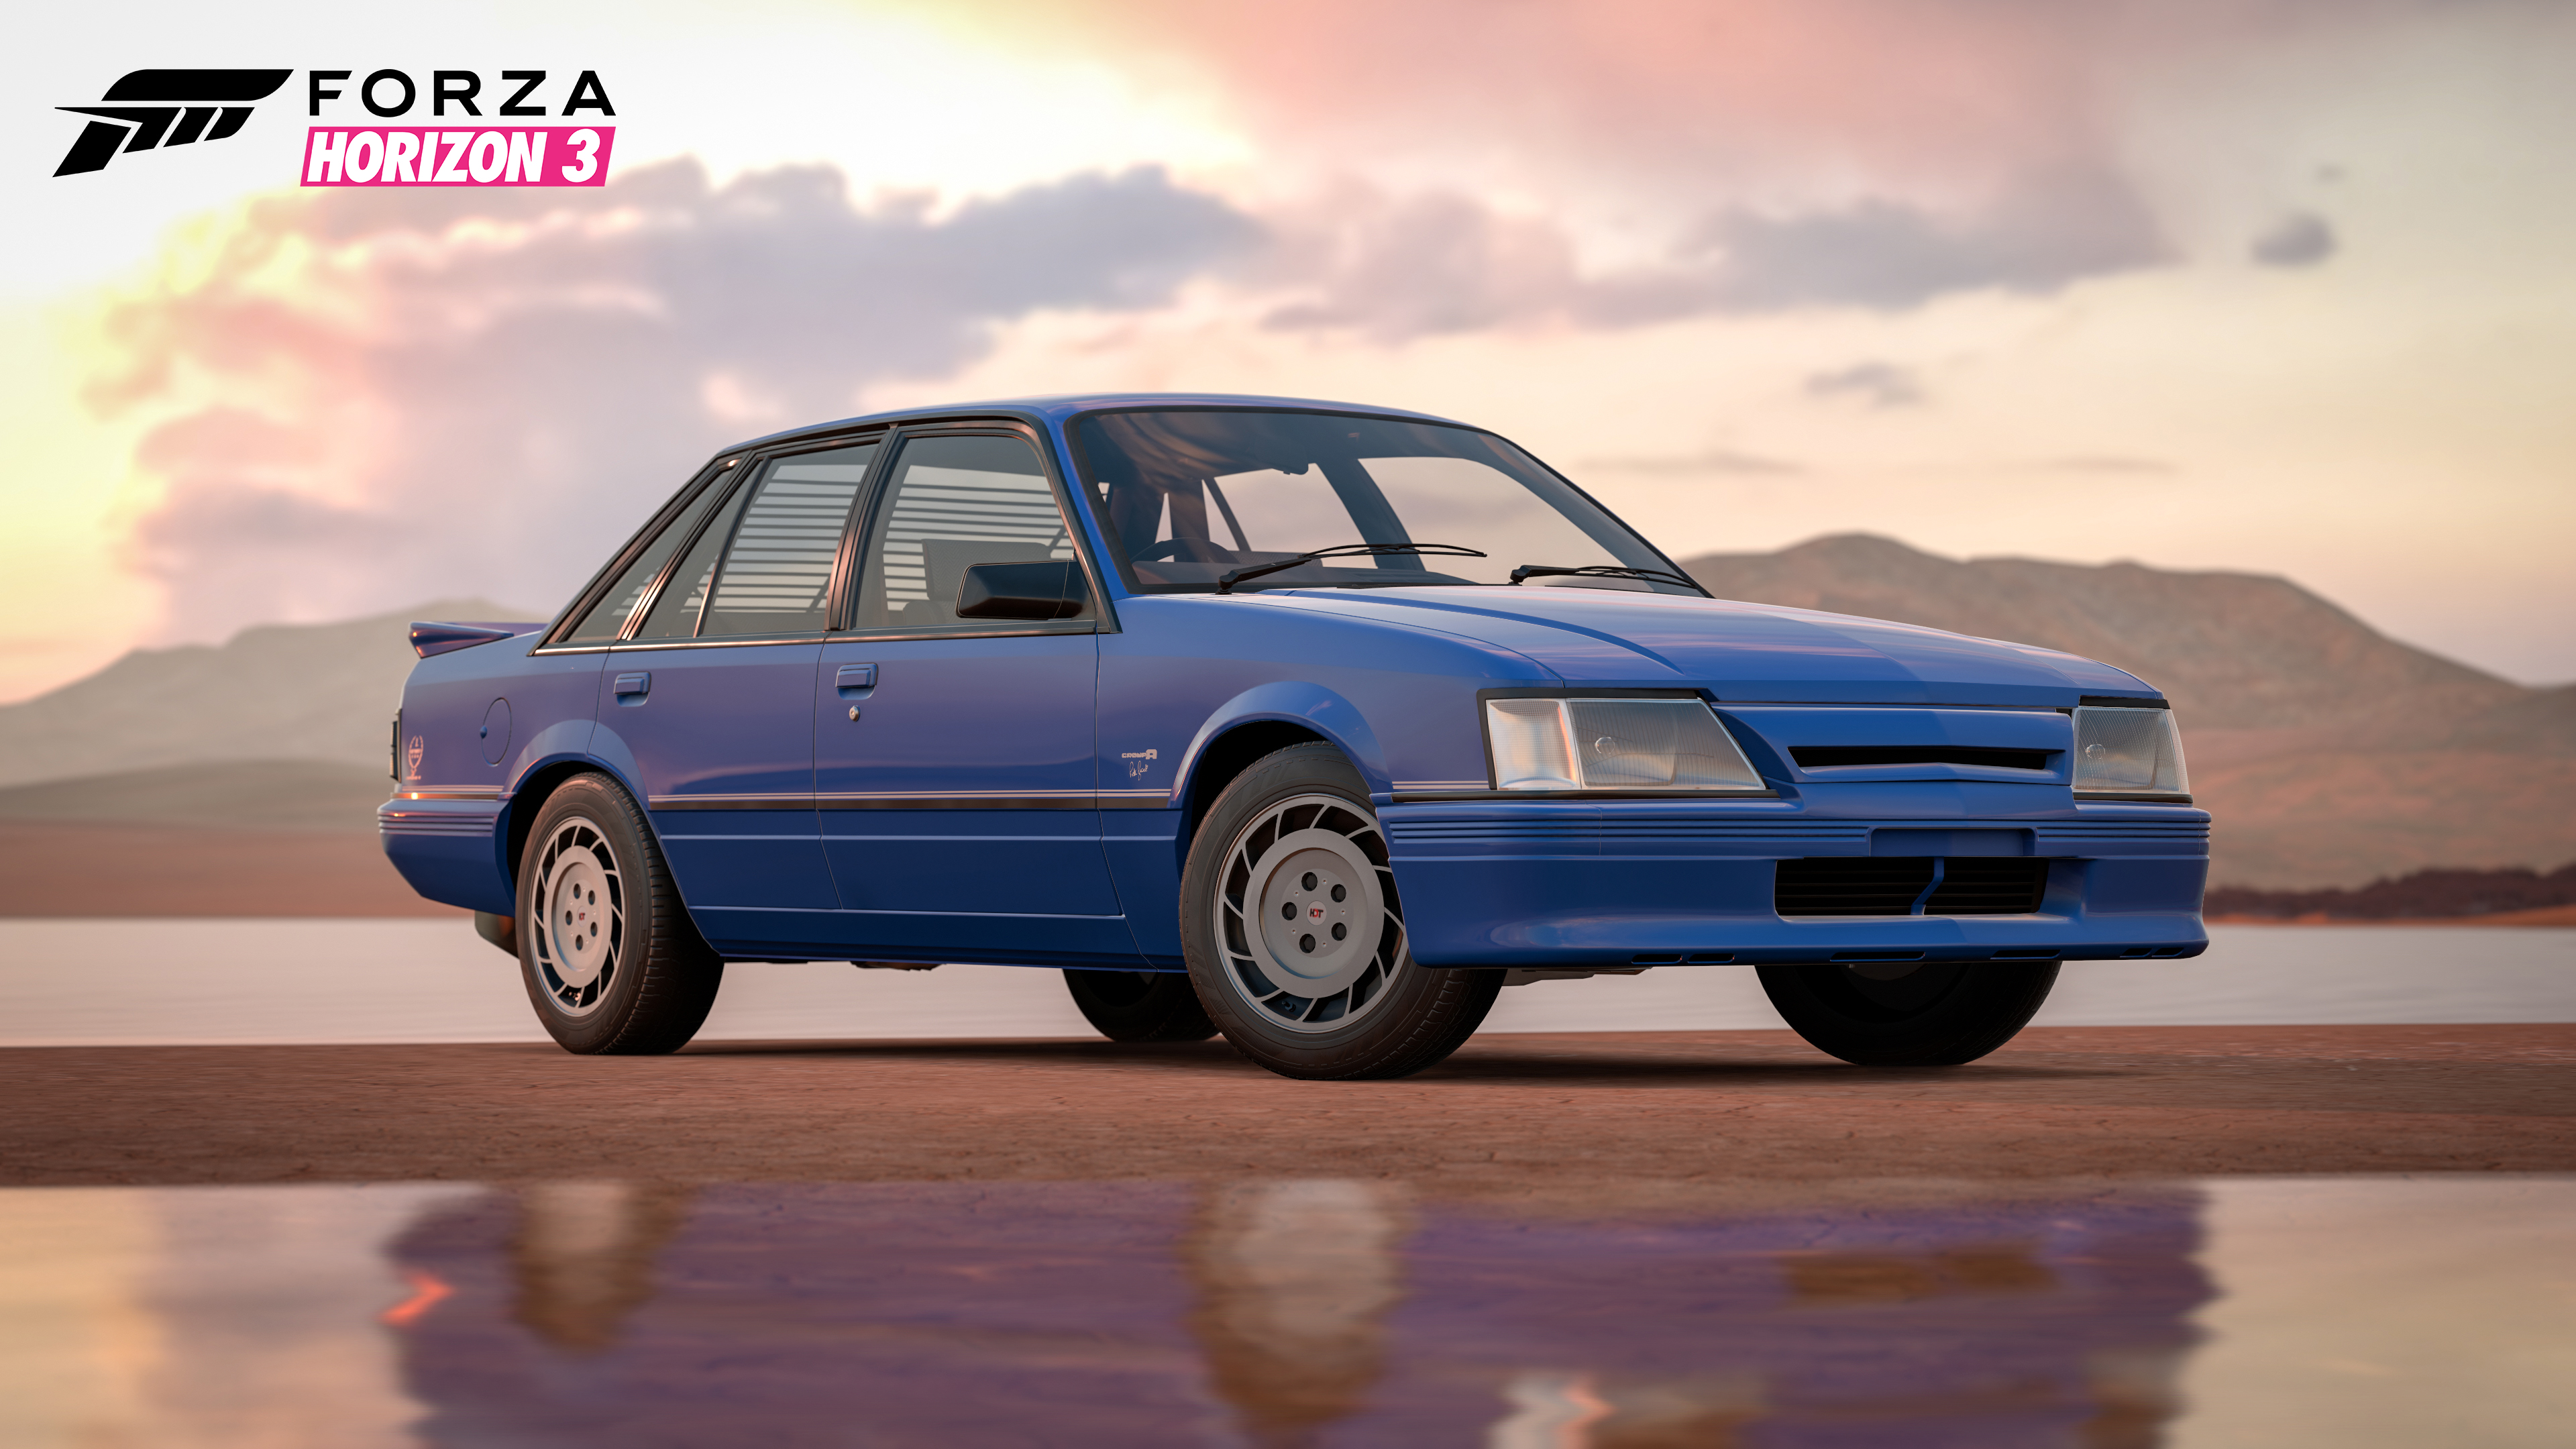 Blue Holden VK Commodore Group A in "Forza Horizon 3."